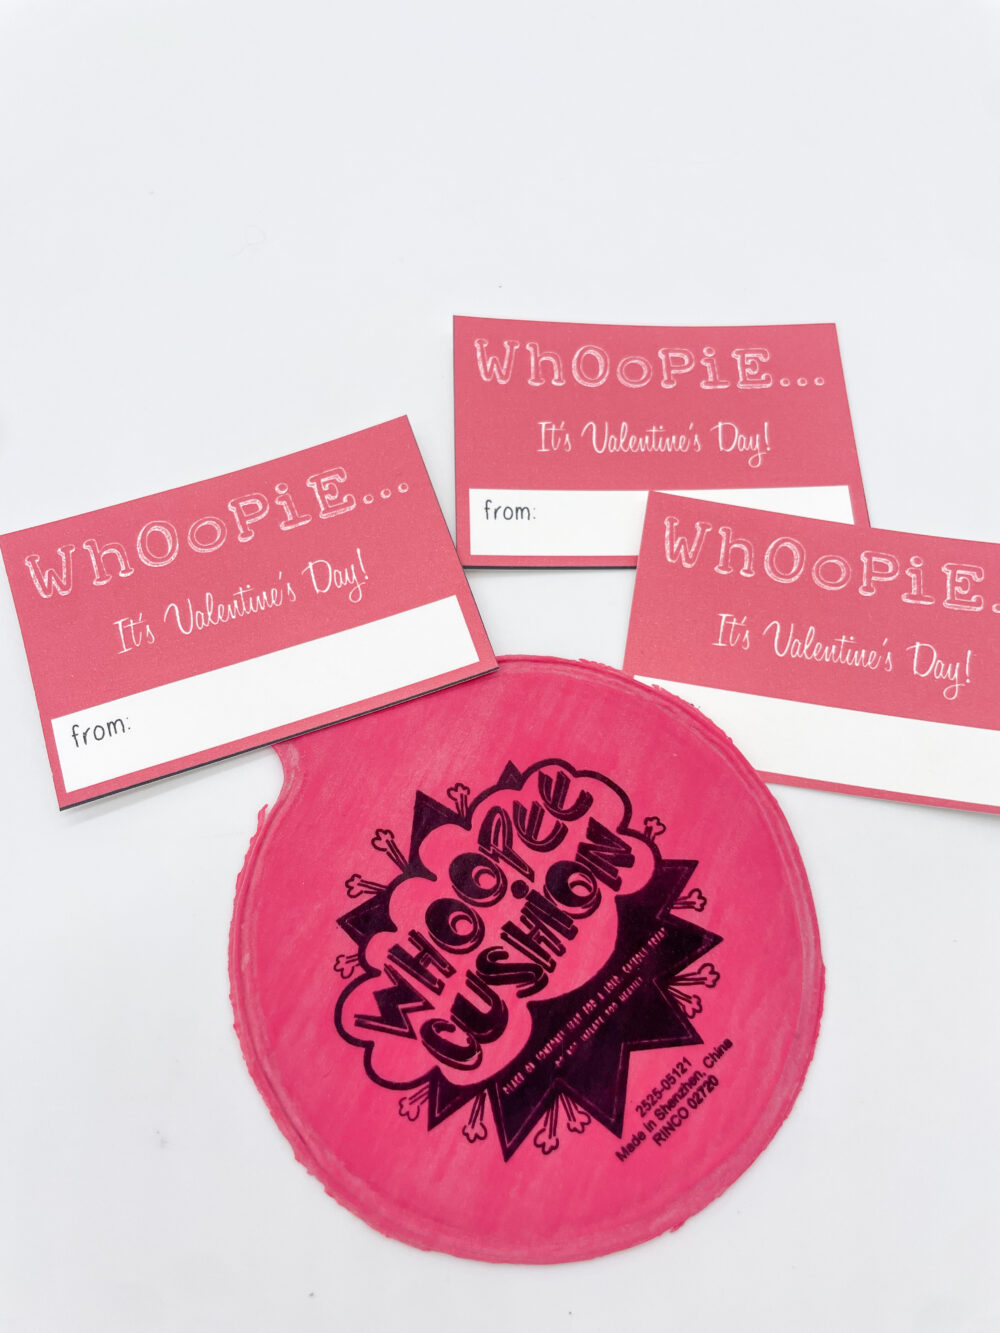 whoopee cushion valentine cards